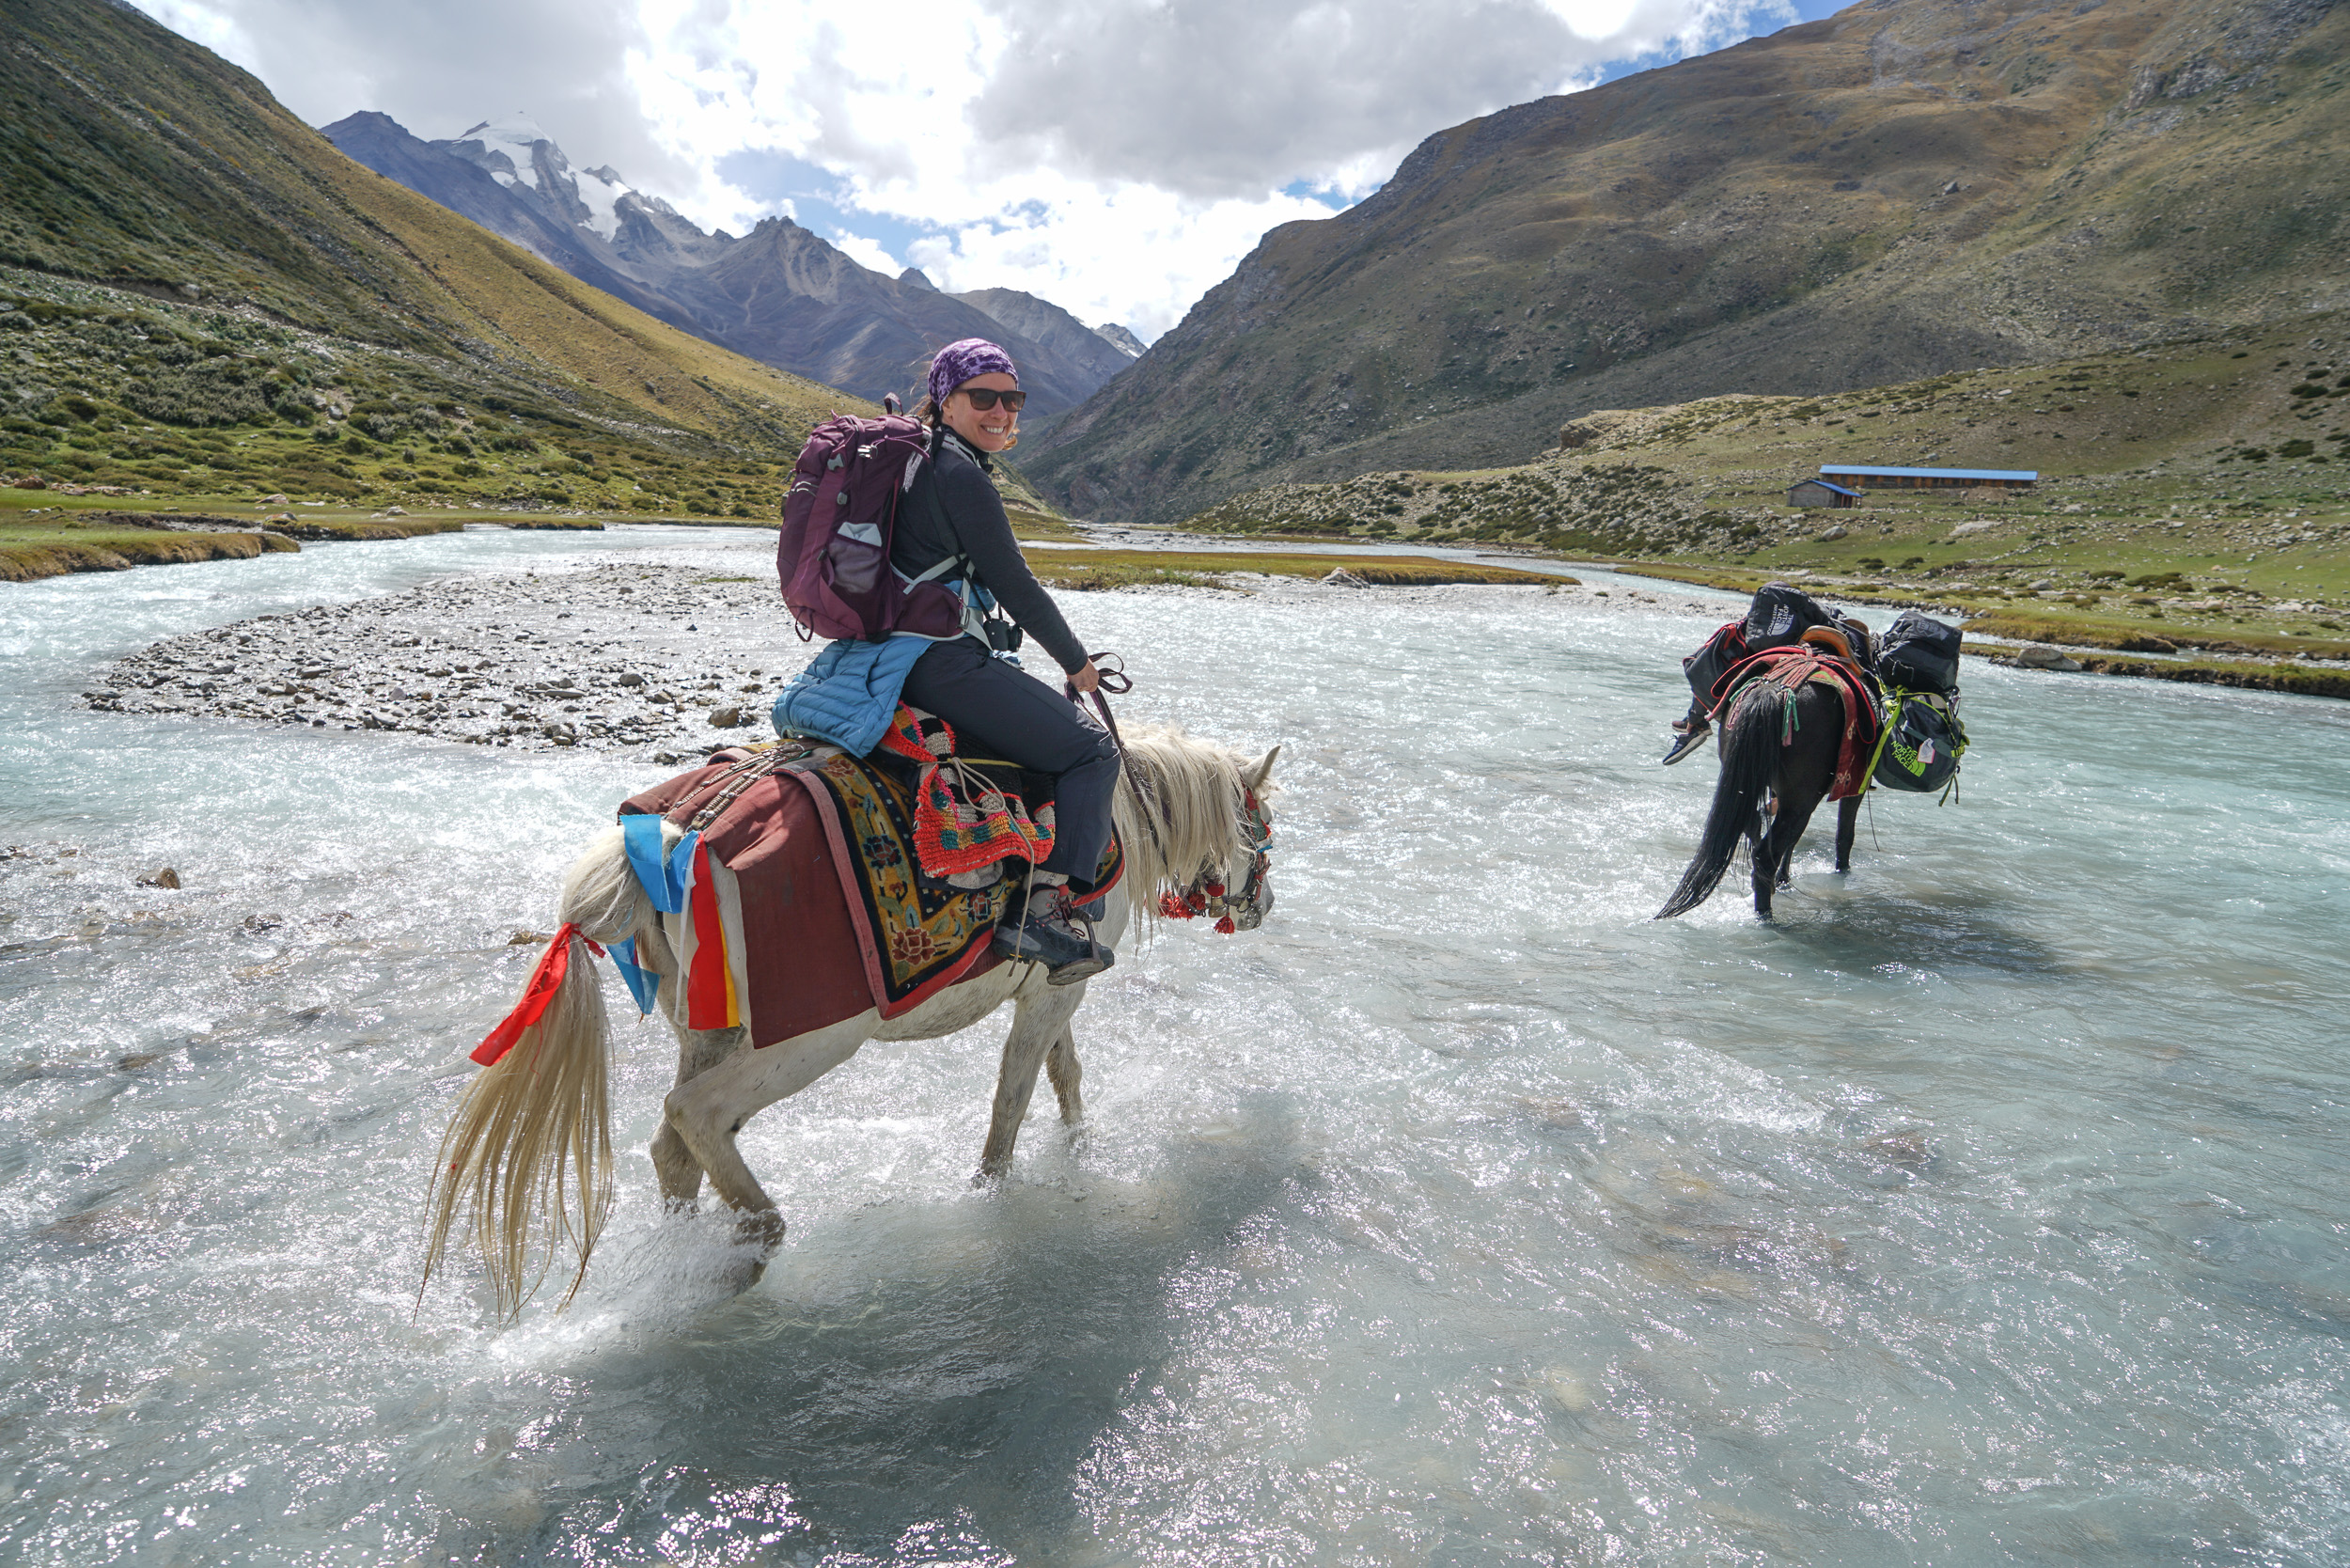 The horses certainly made the trek easier. Up and down trails and crossing rivers of ice cold glacier melt